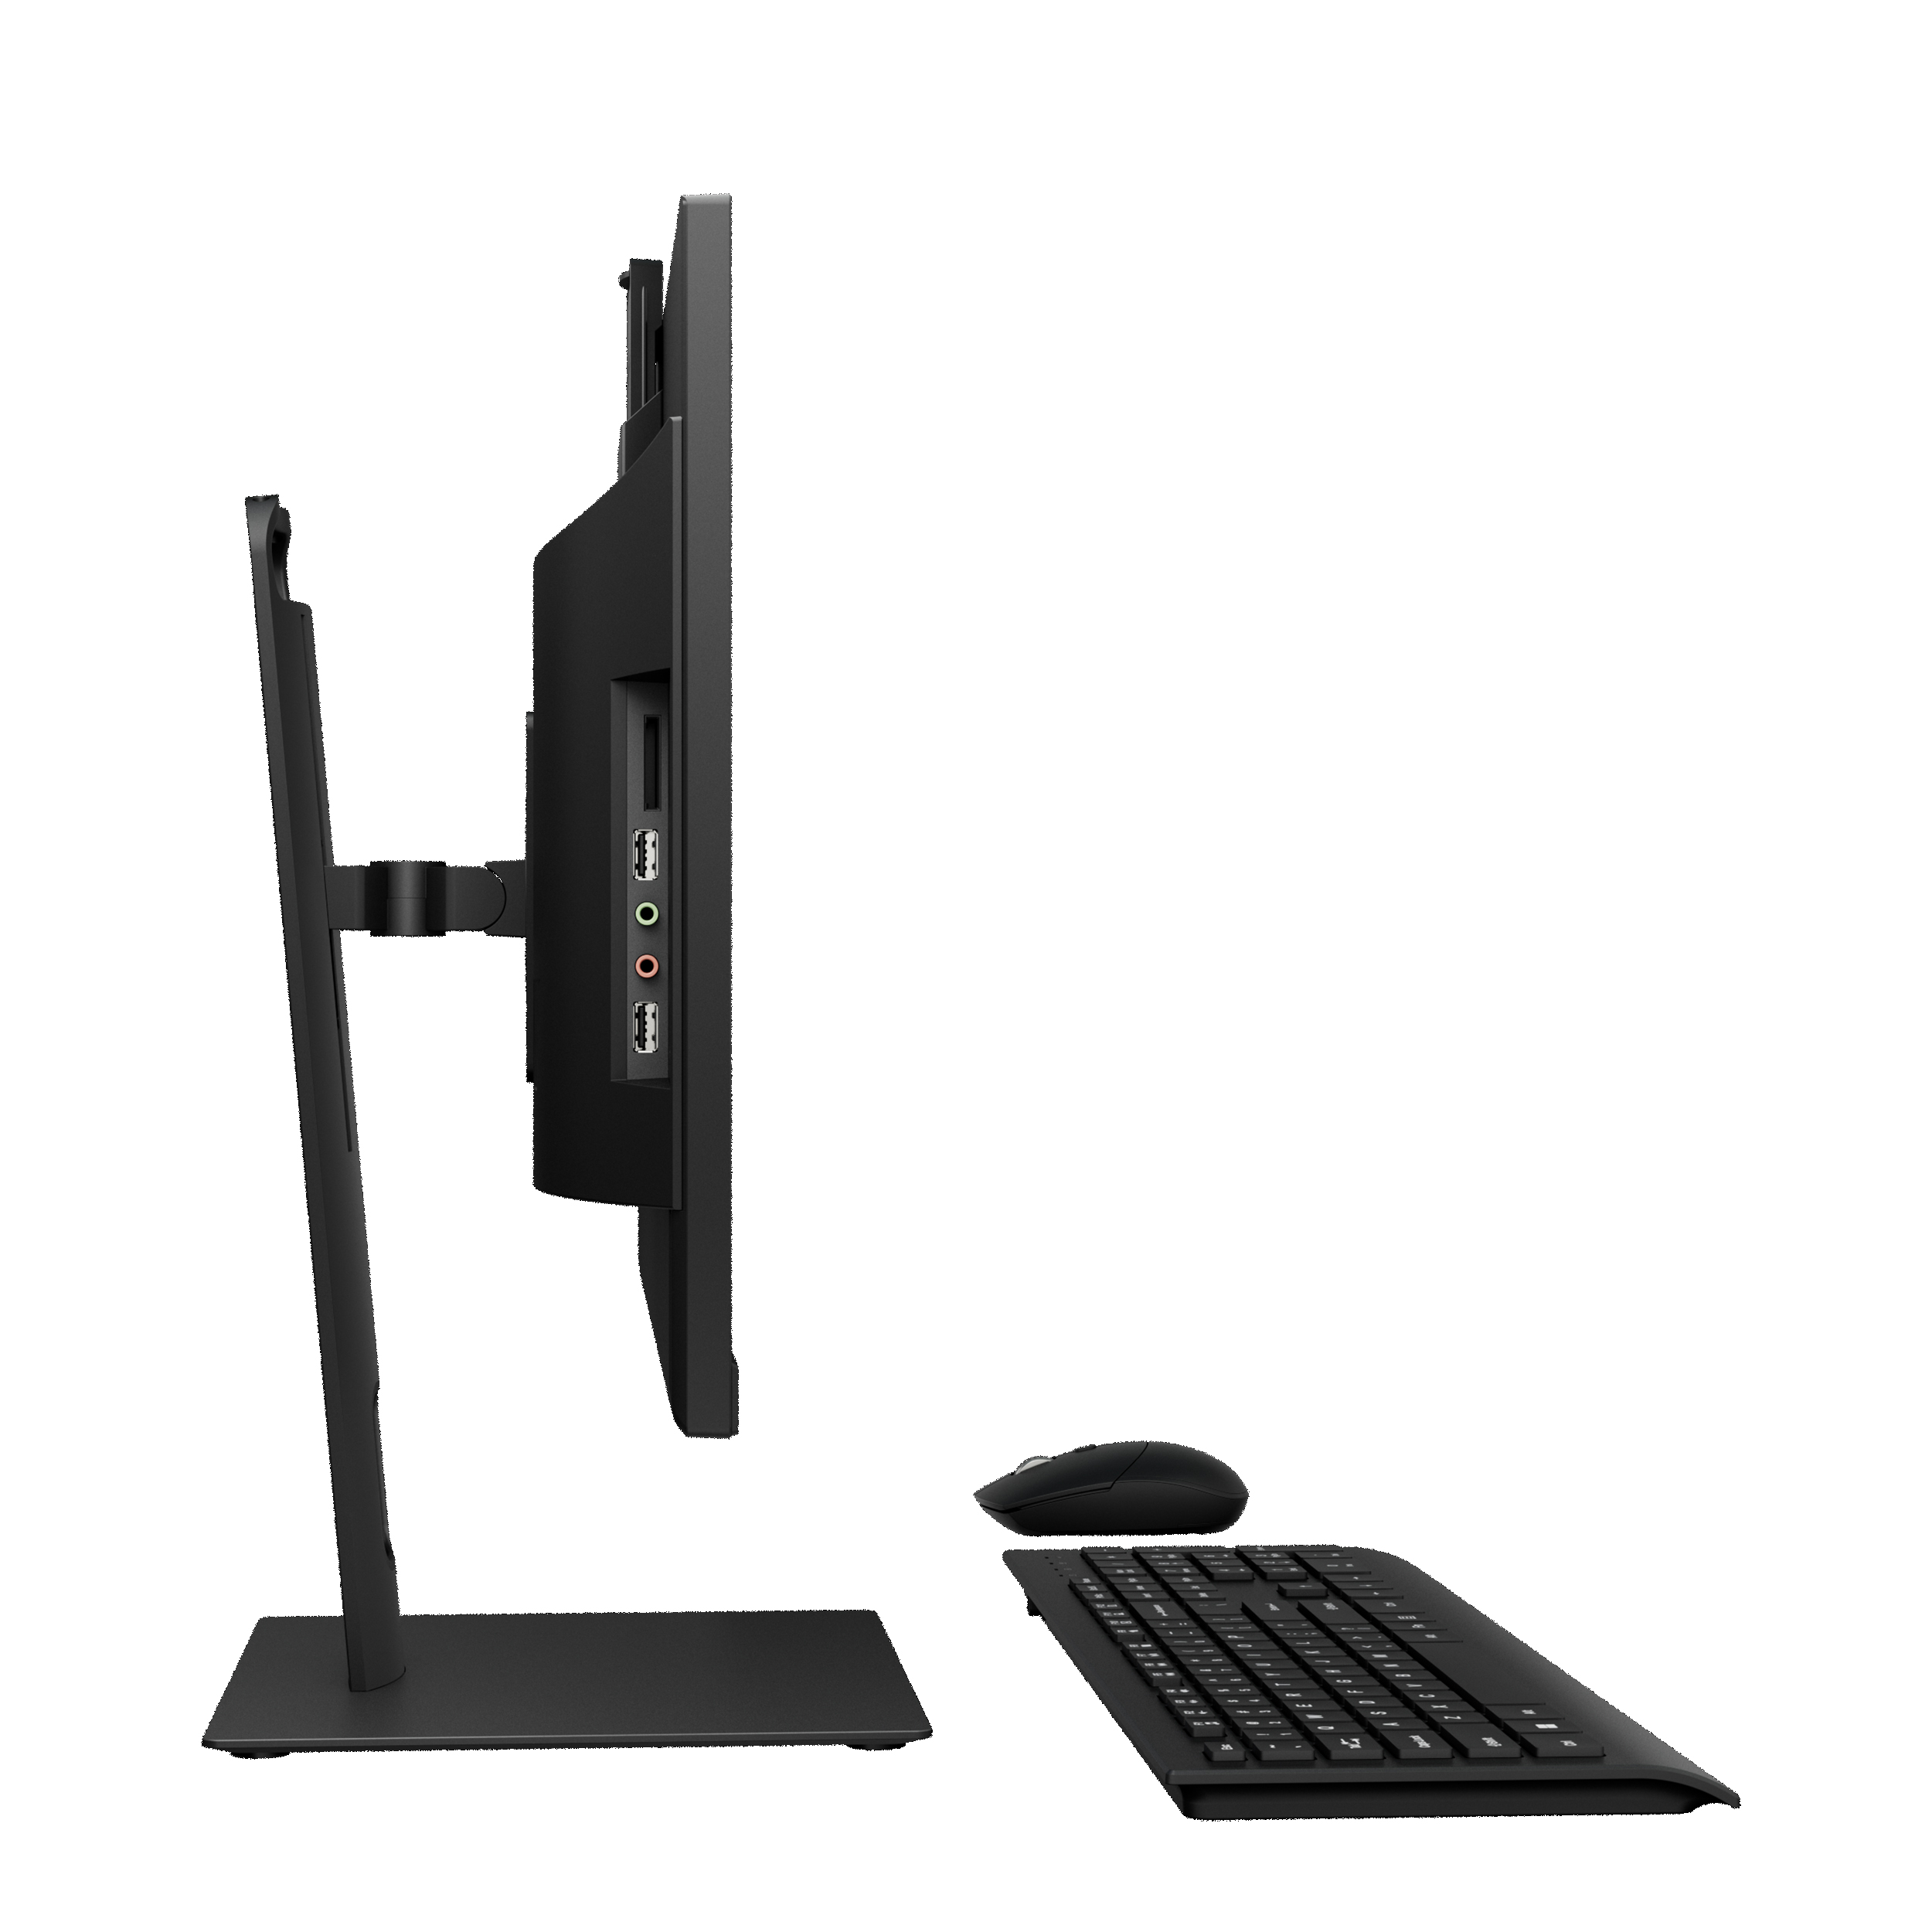 Gateway 23.8" All-in-one Desktop, Fully Adjustable Stand, FHD, Intel Pentium J5040, 4GB RAM, 128GB SSD, 2MP Camera, Windows 11, Microsoft 365 Personal 1-Year Included, Mouse & Keyboard Included, Black - image 3 of 11